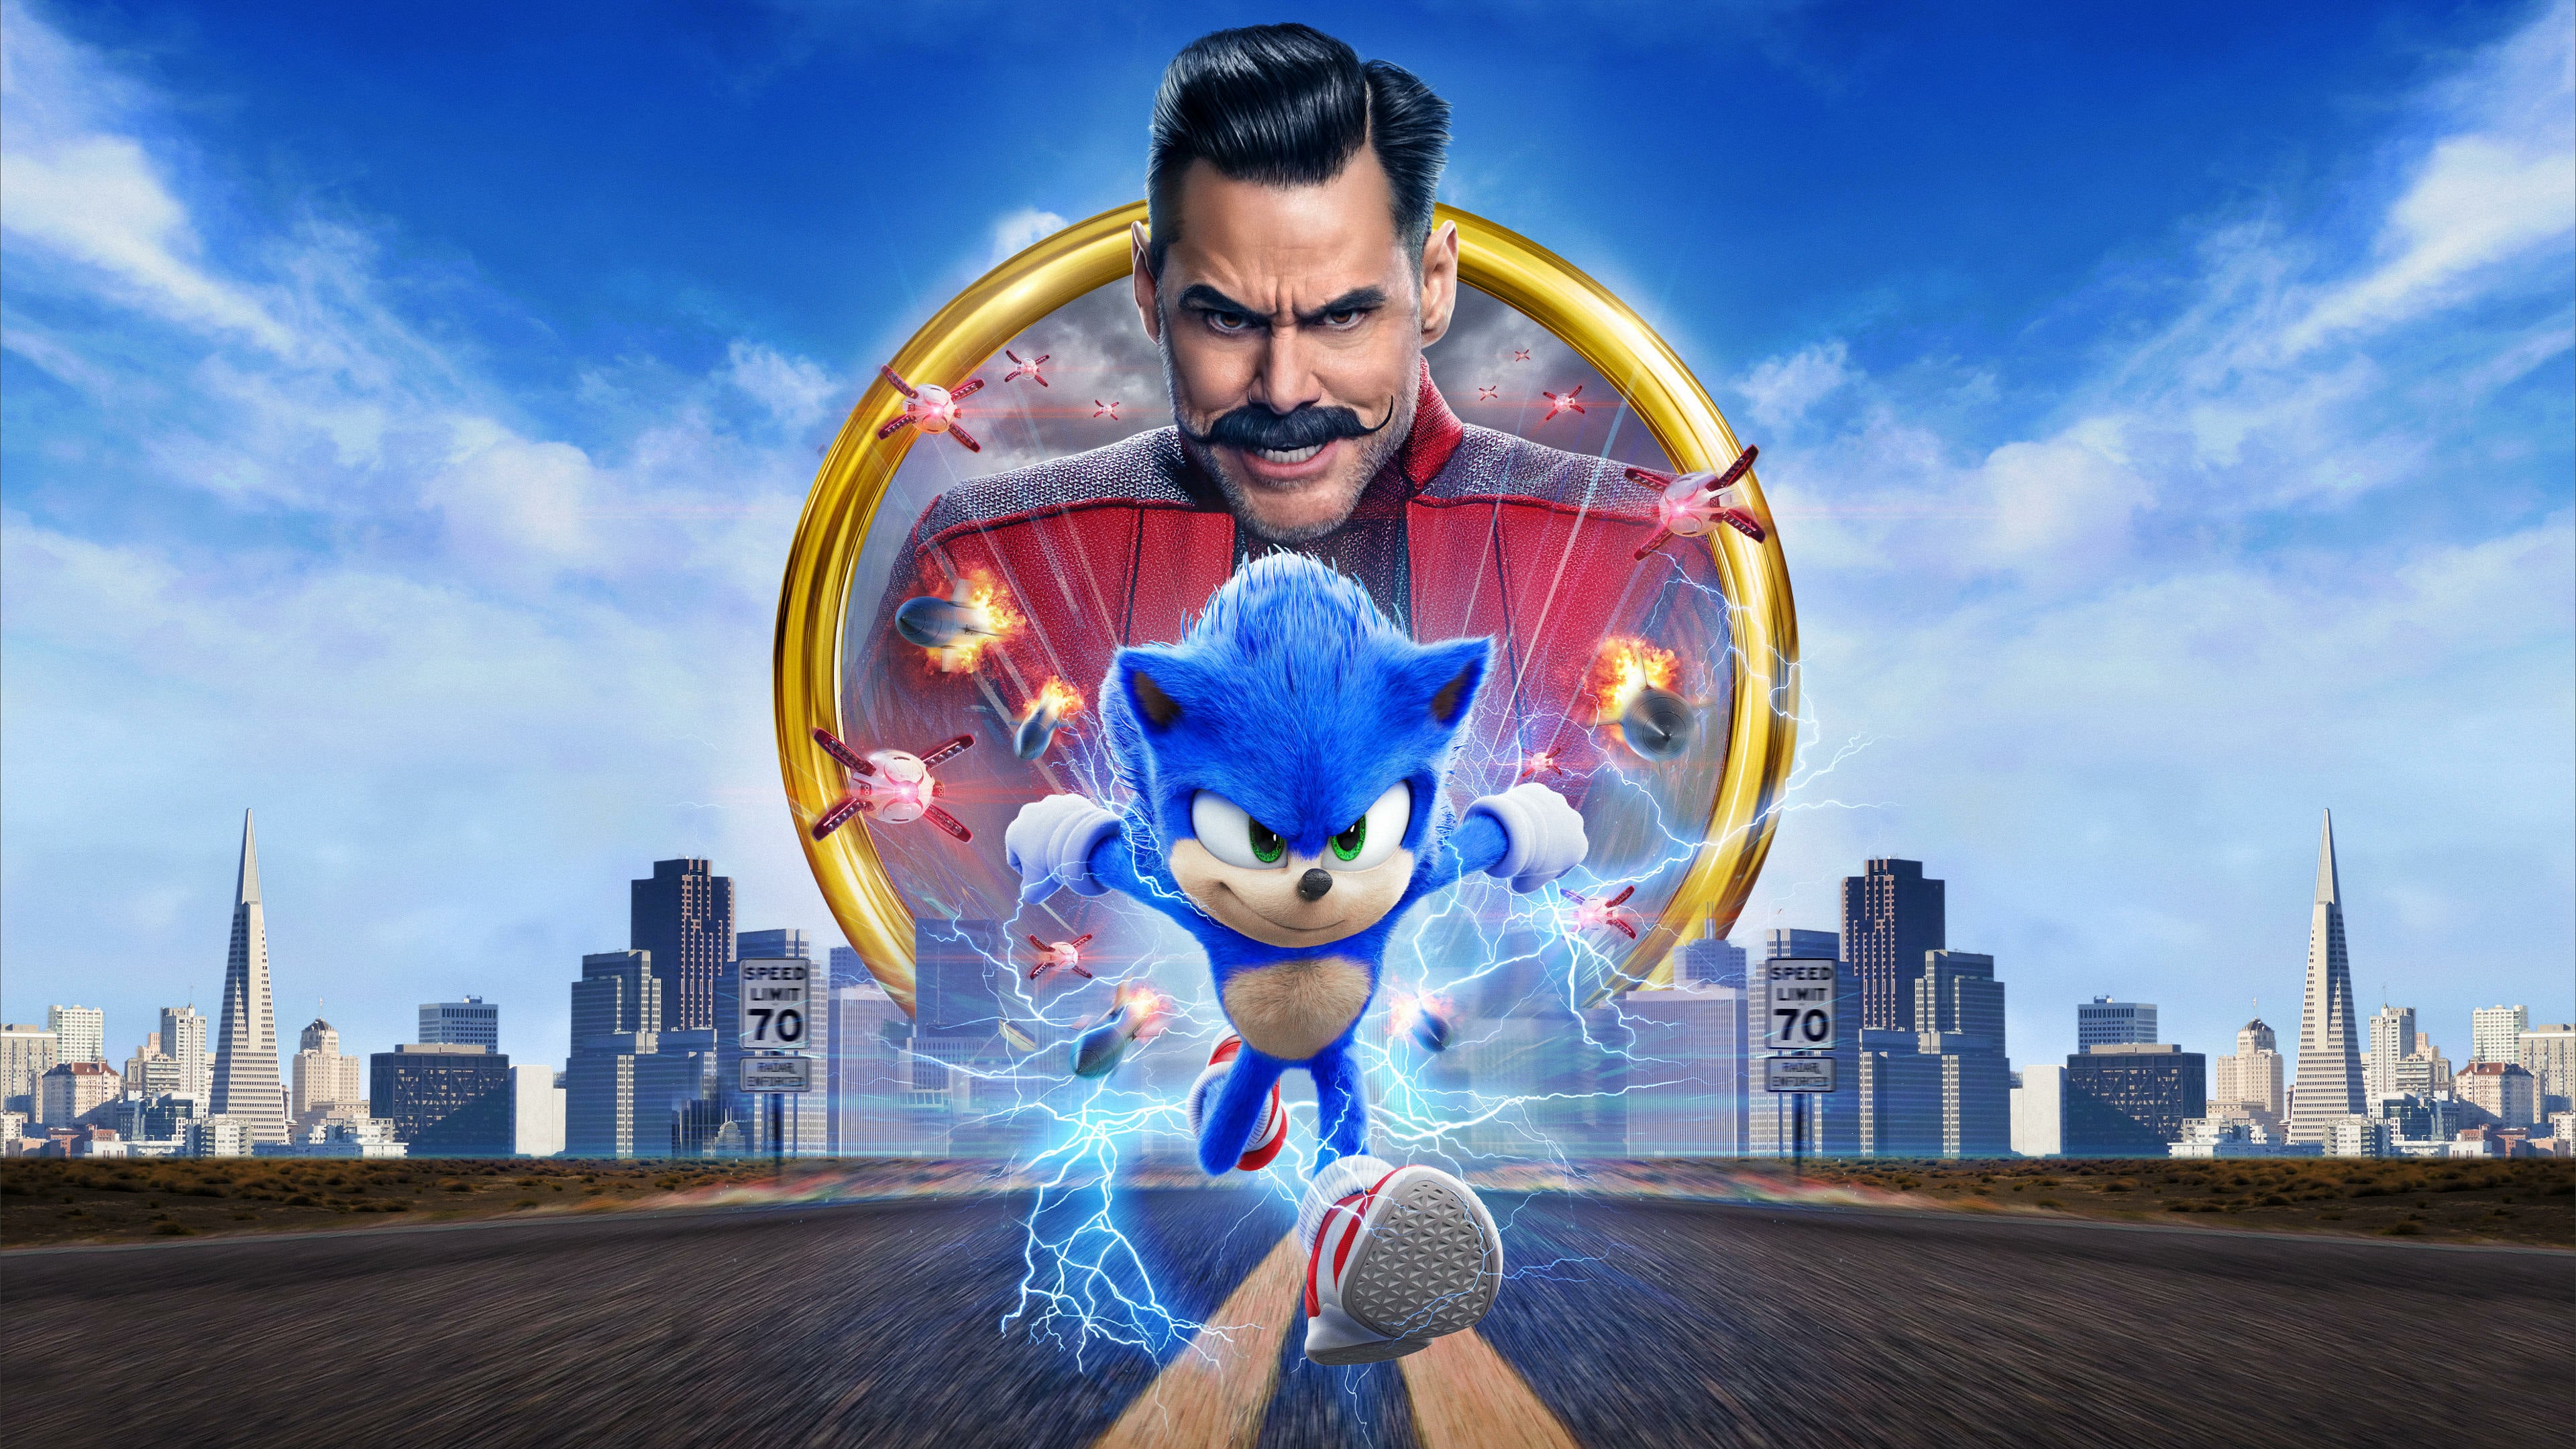 Sonic The Hedgehog 2020 Watch Online - 123Movies New 2020